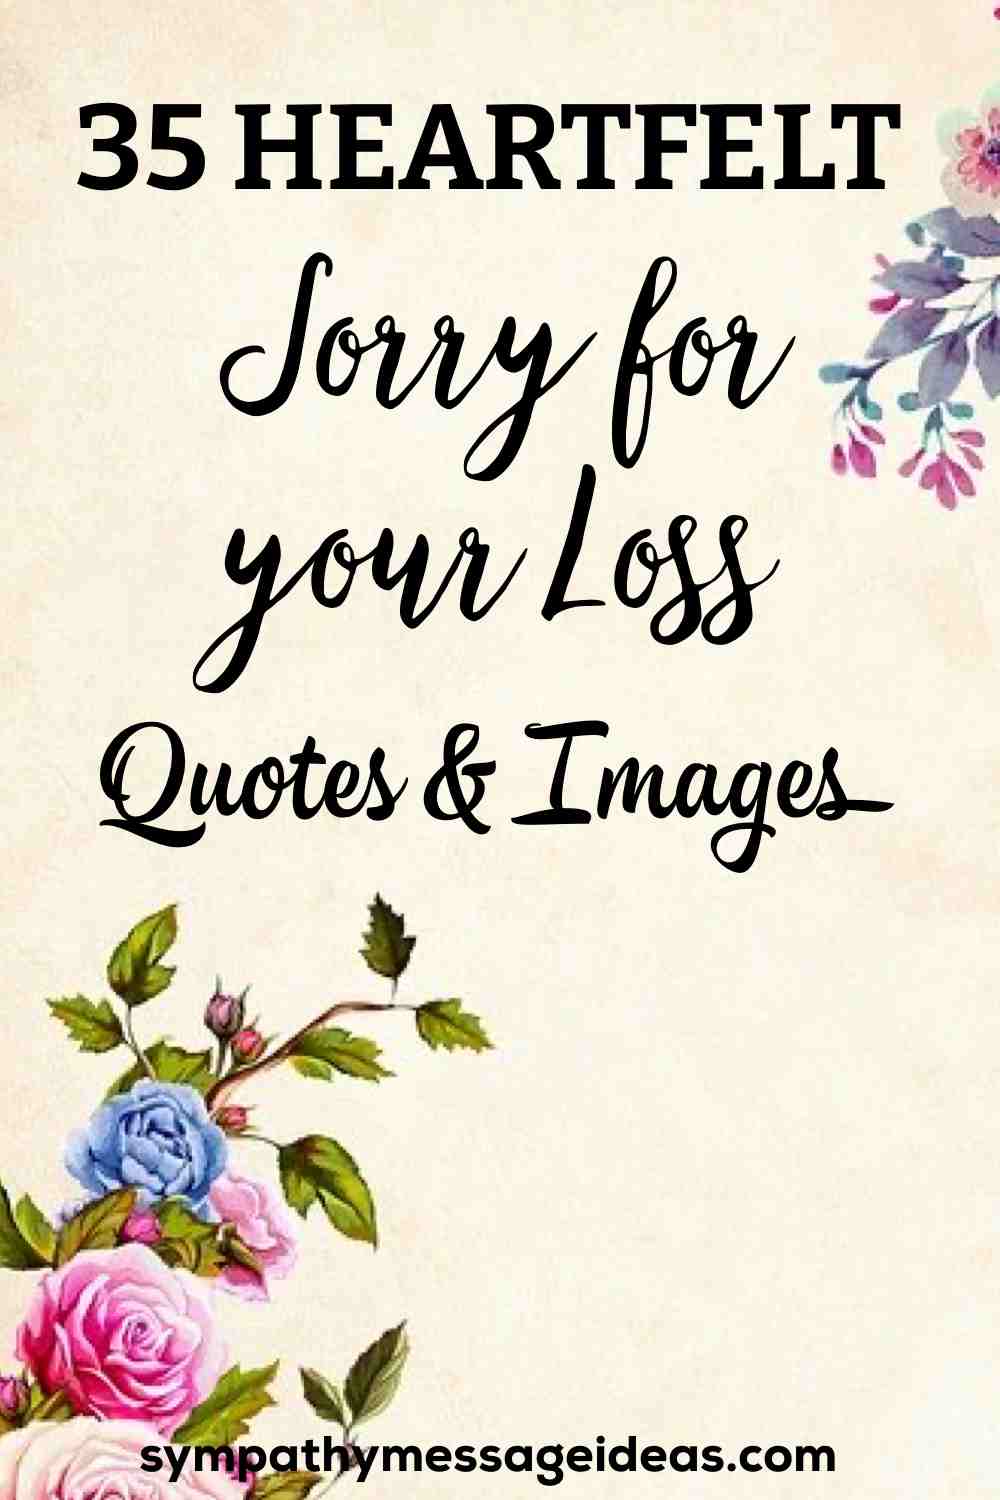 sorry for your loss quotes and images